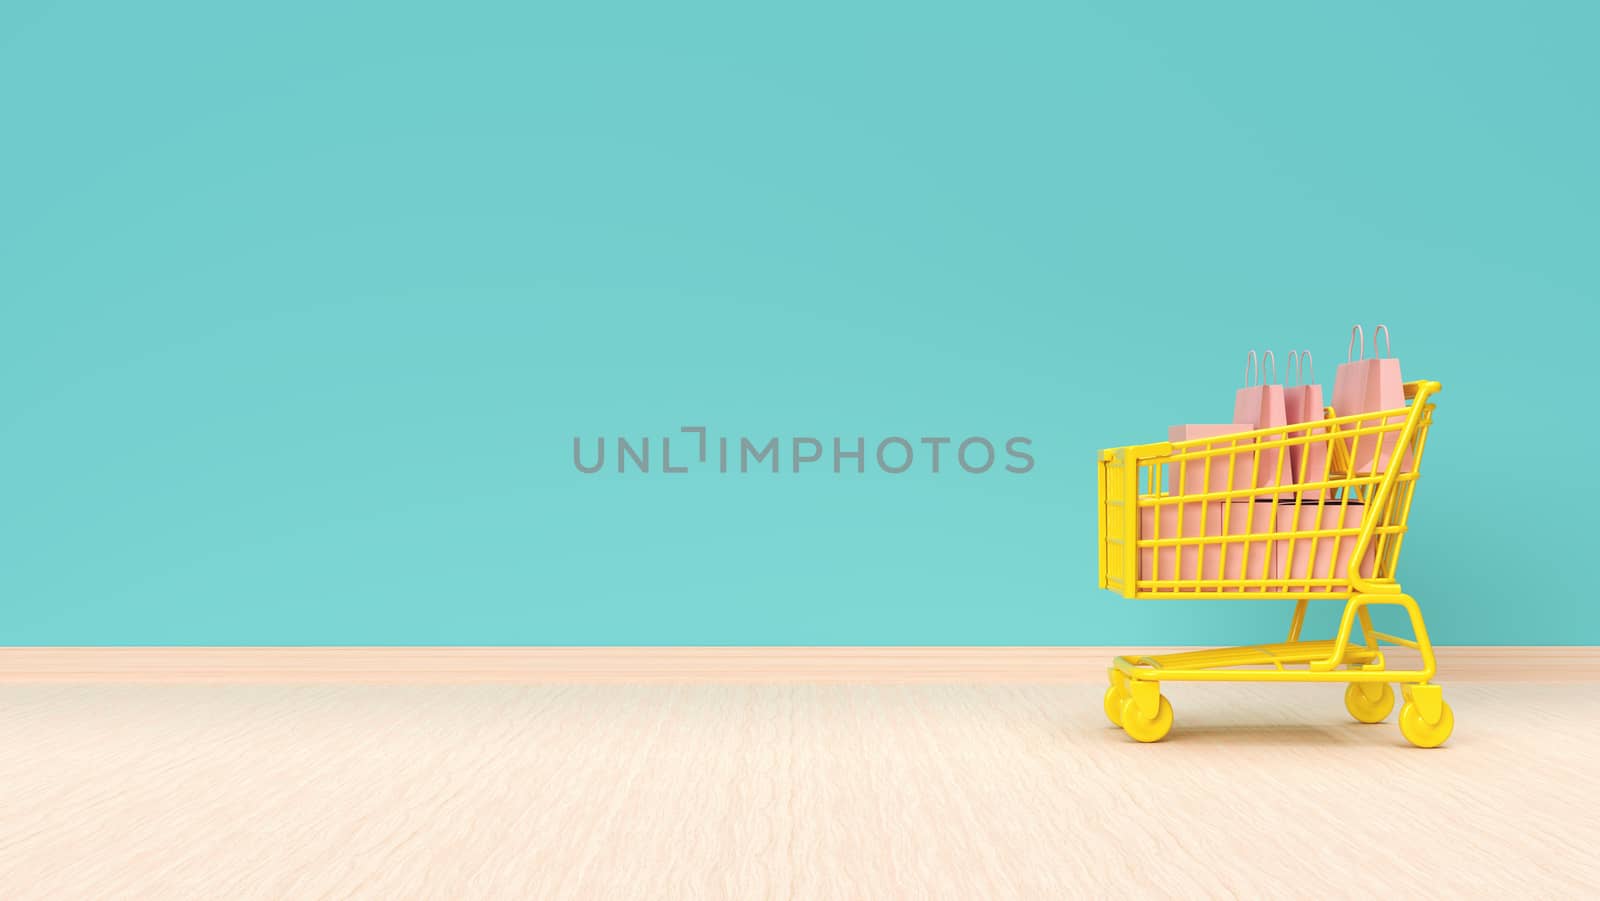 Online shopping concept. Shopping cart with bags and boxes on mint green wall background. 3d illustration.